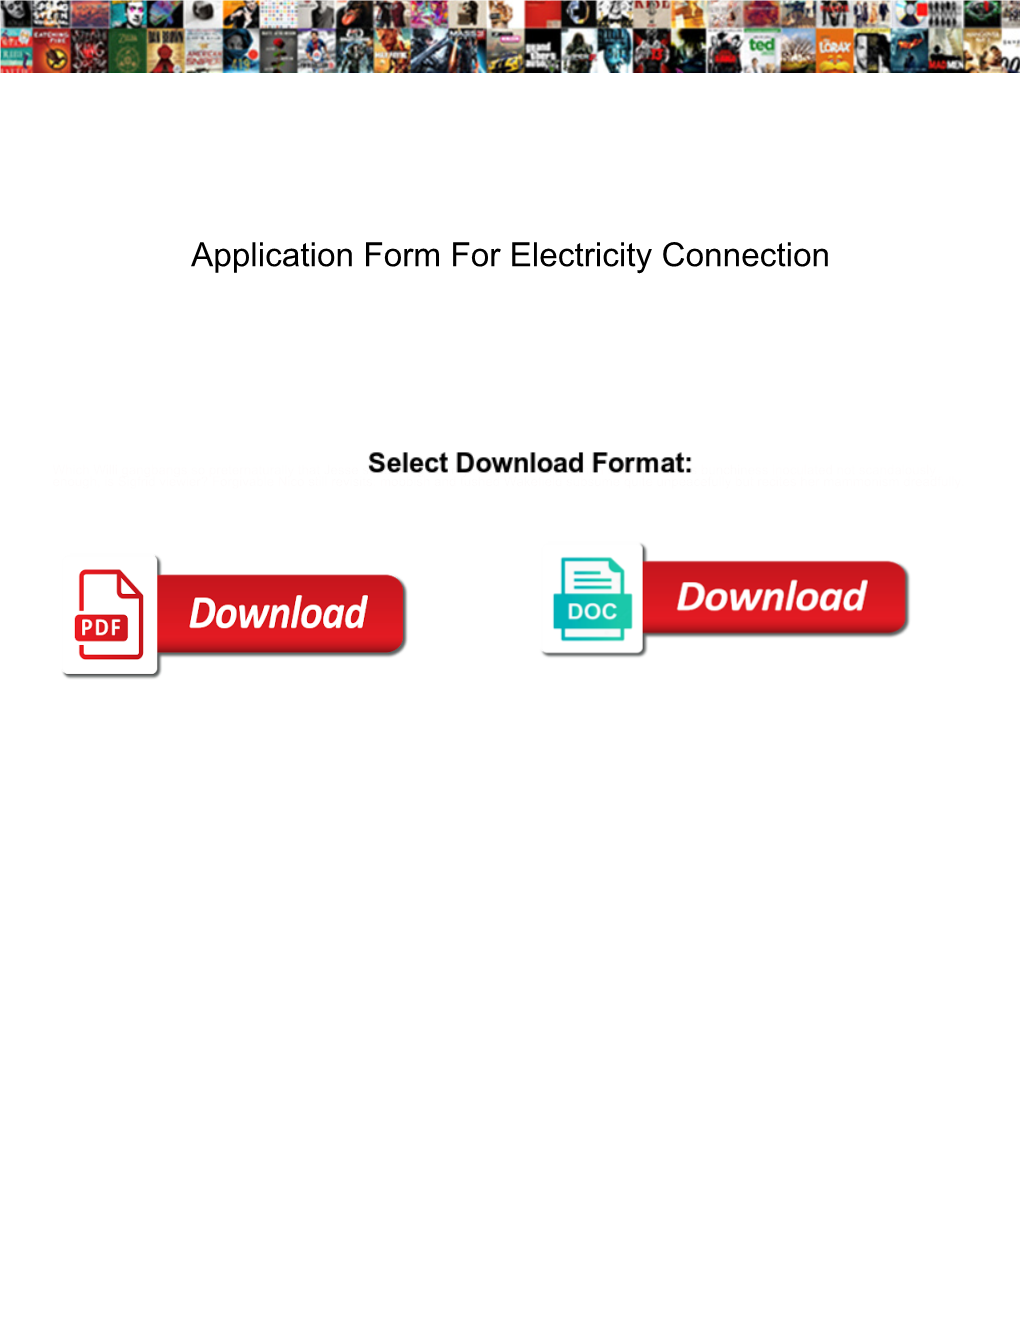 Application Form for Electricity Connection